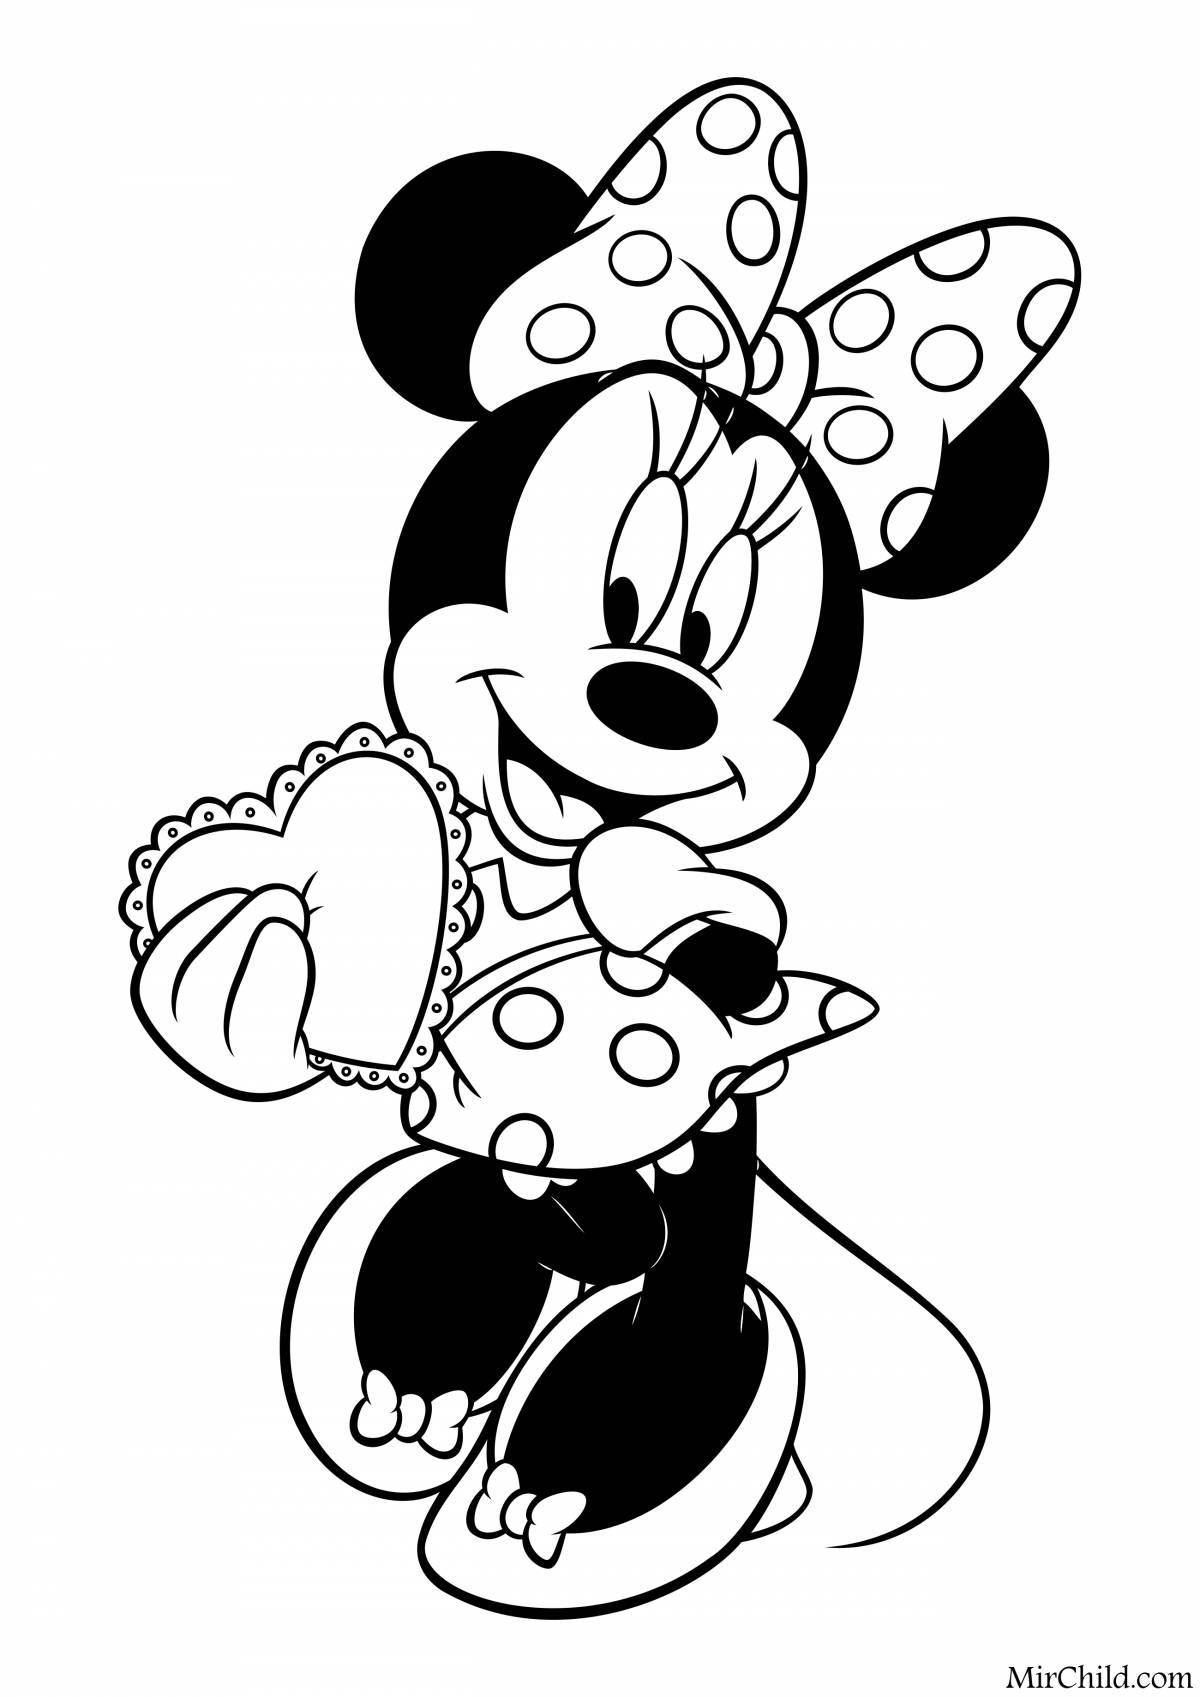 Playful mickey mouse coloring page